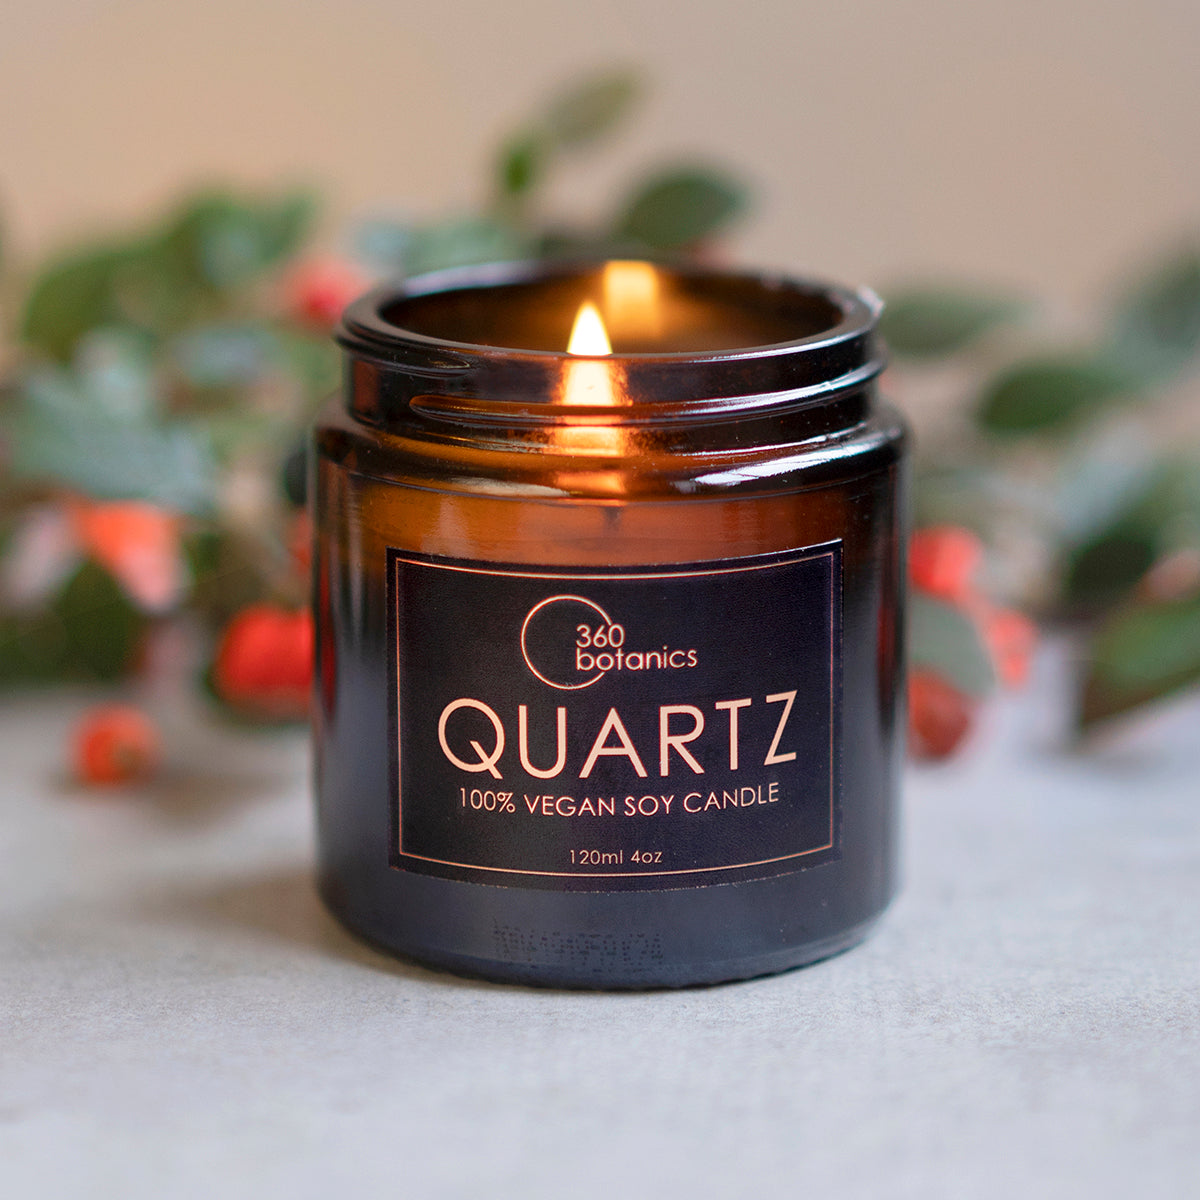 A lit 360 Botanics 'QUARTZ' vegan soy candle in a sophisticated black glass jar, with a gentle flame casting a warm glow. The 120ml jar is set against a soft focus background featuring subtle green foliage and hints of red berries, creating a serene and inviting atmosphere